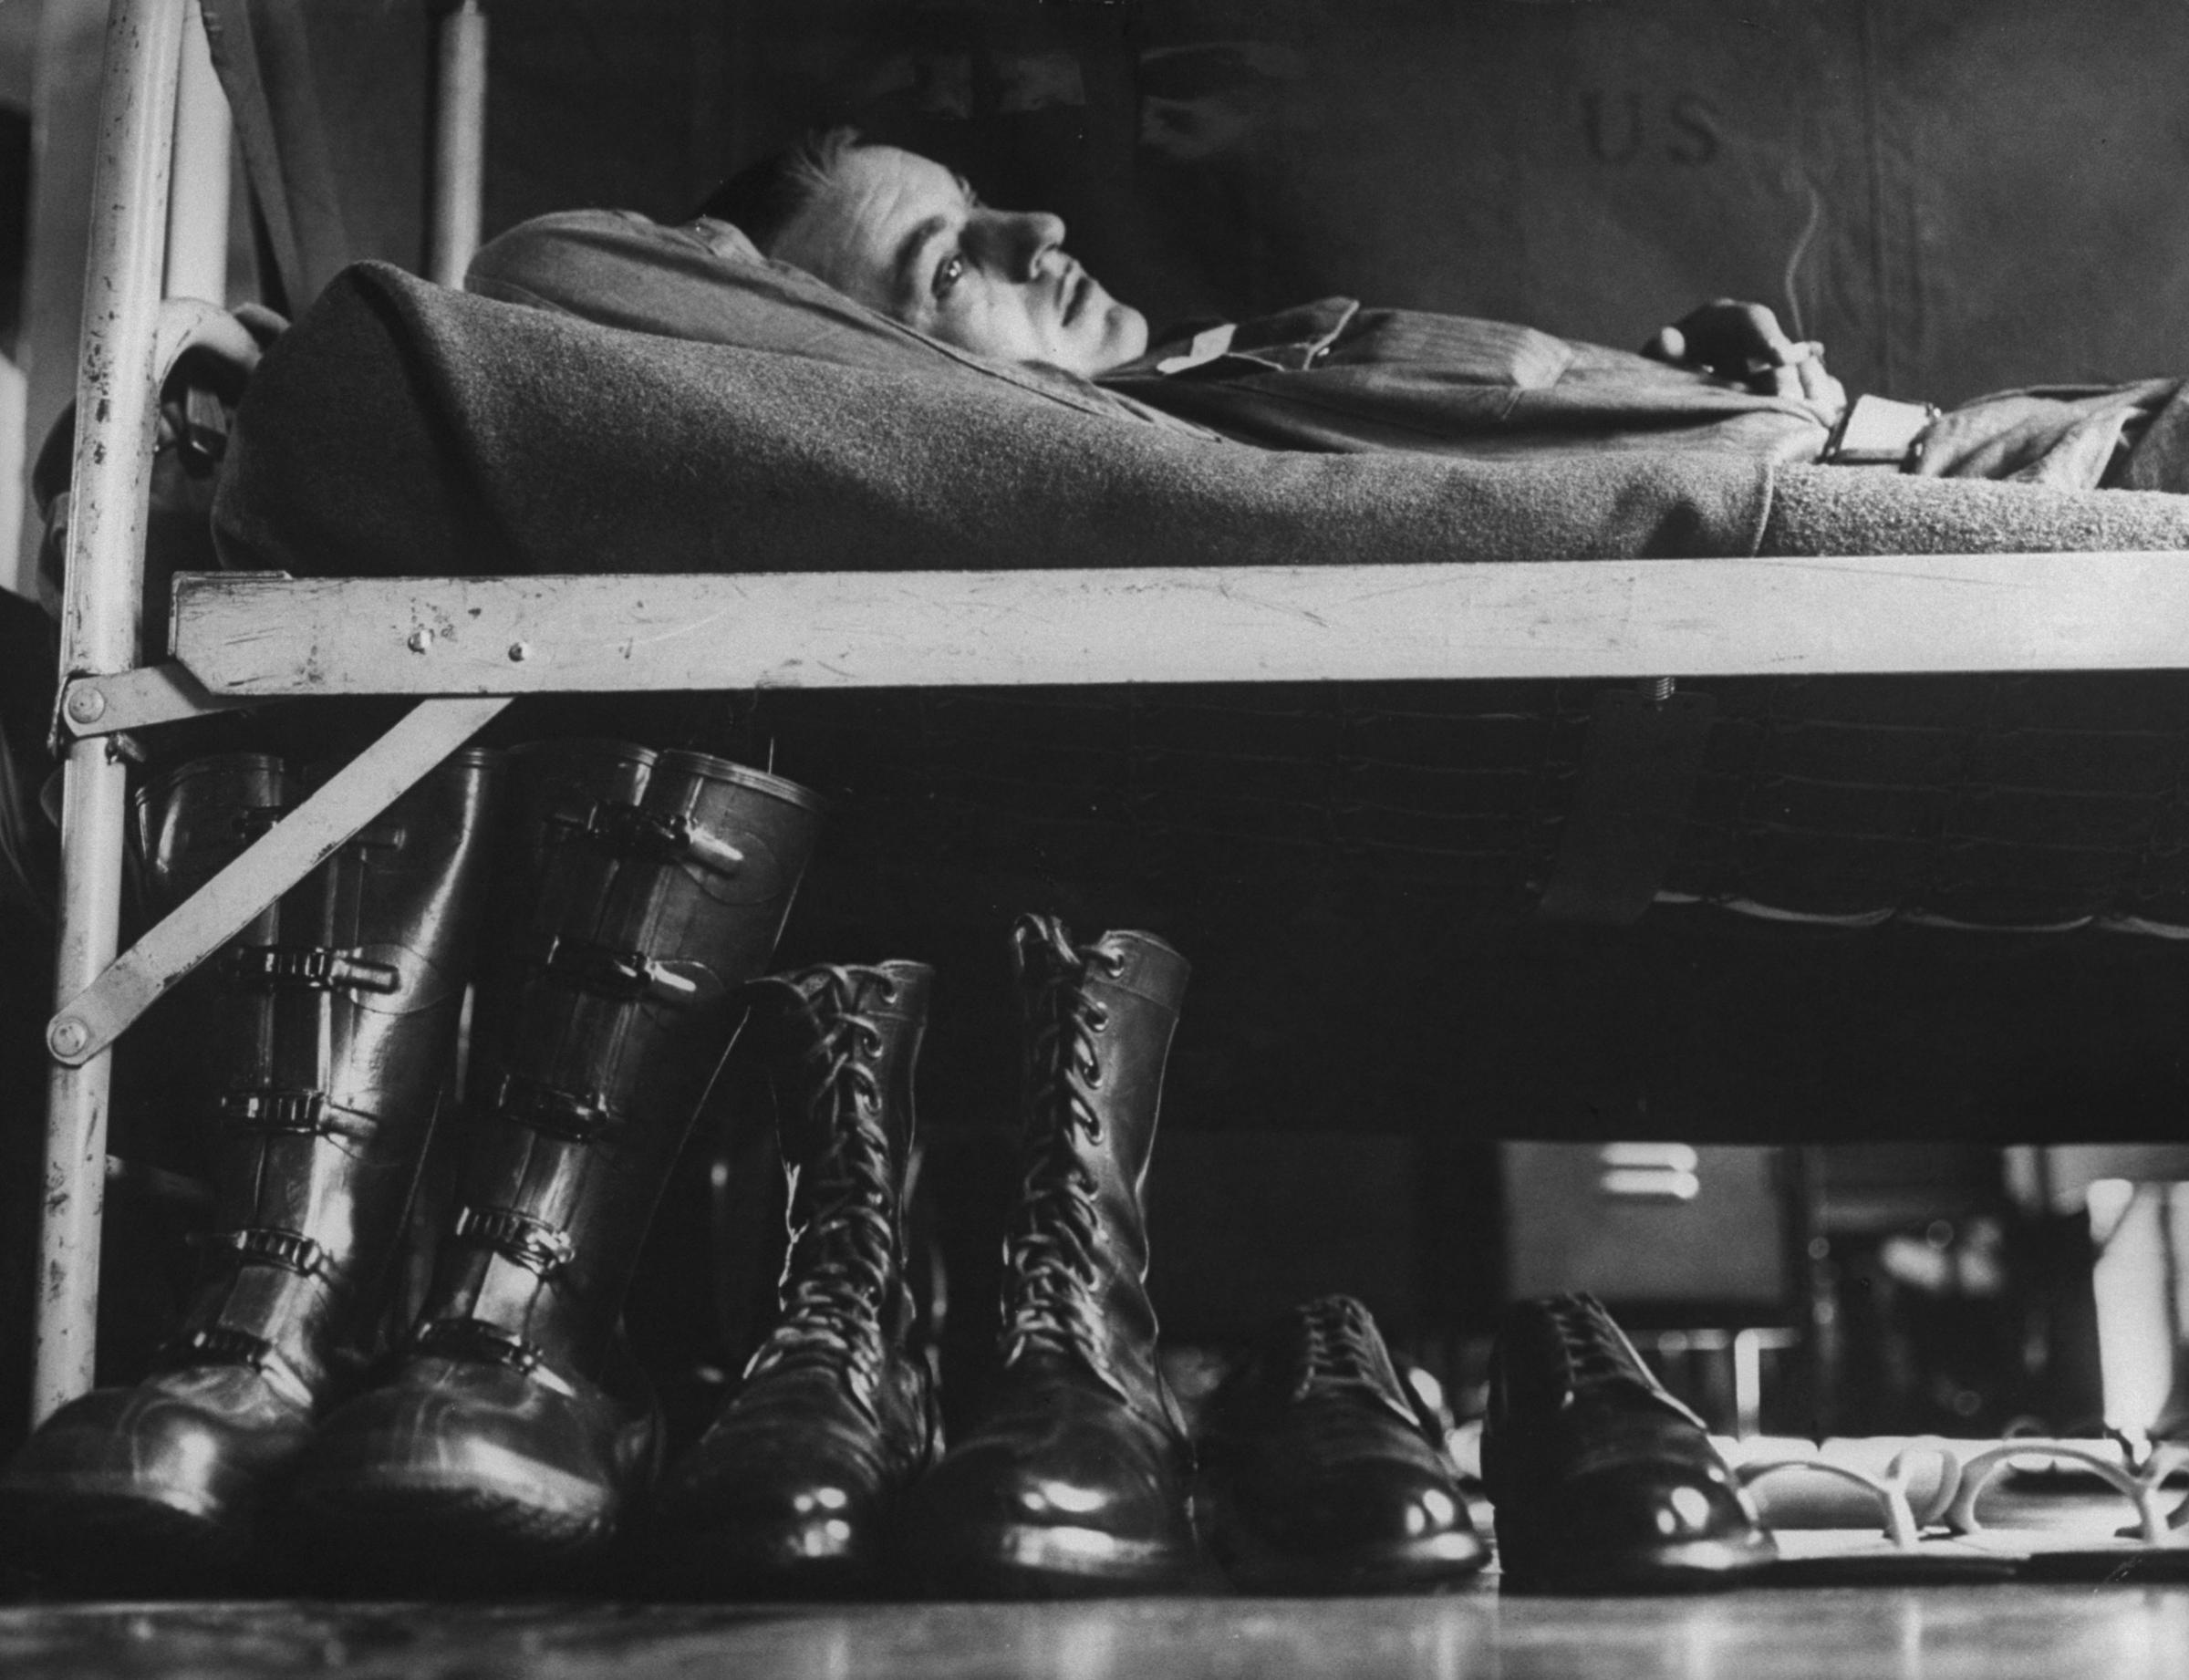 A draftee relaxes on his bunk during basic training, Fort Carson, Colorado, 1955.